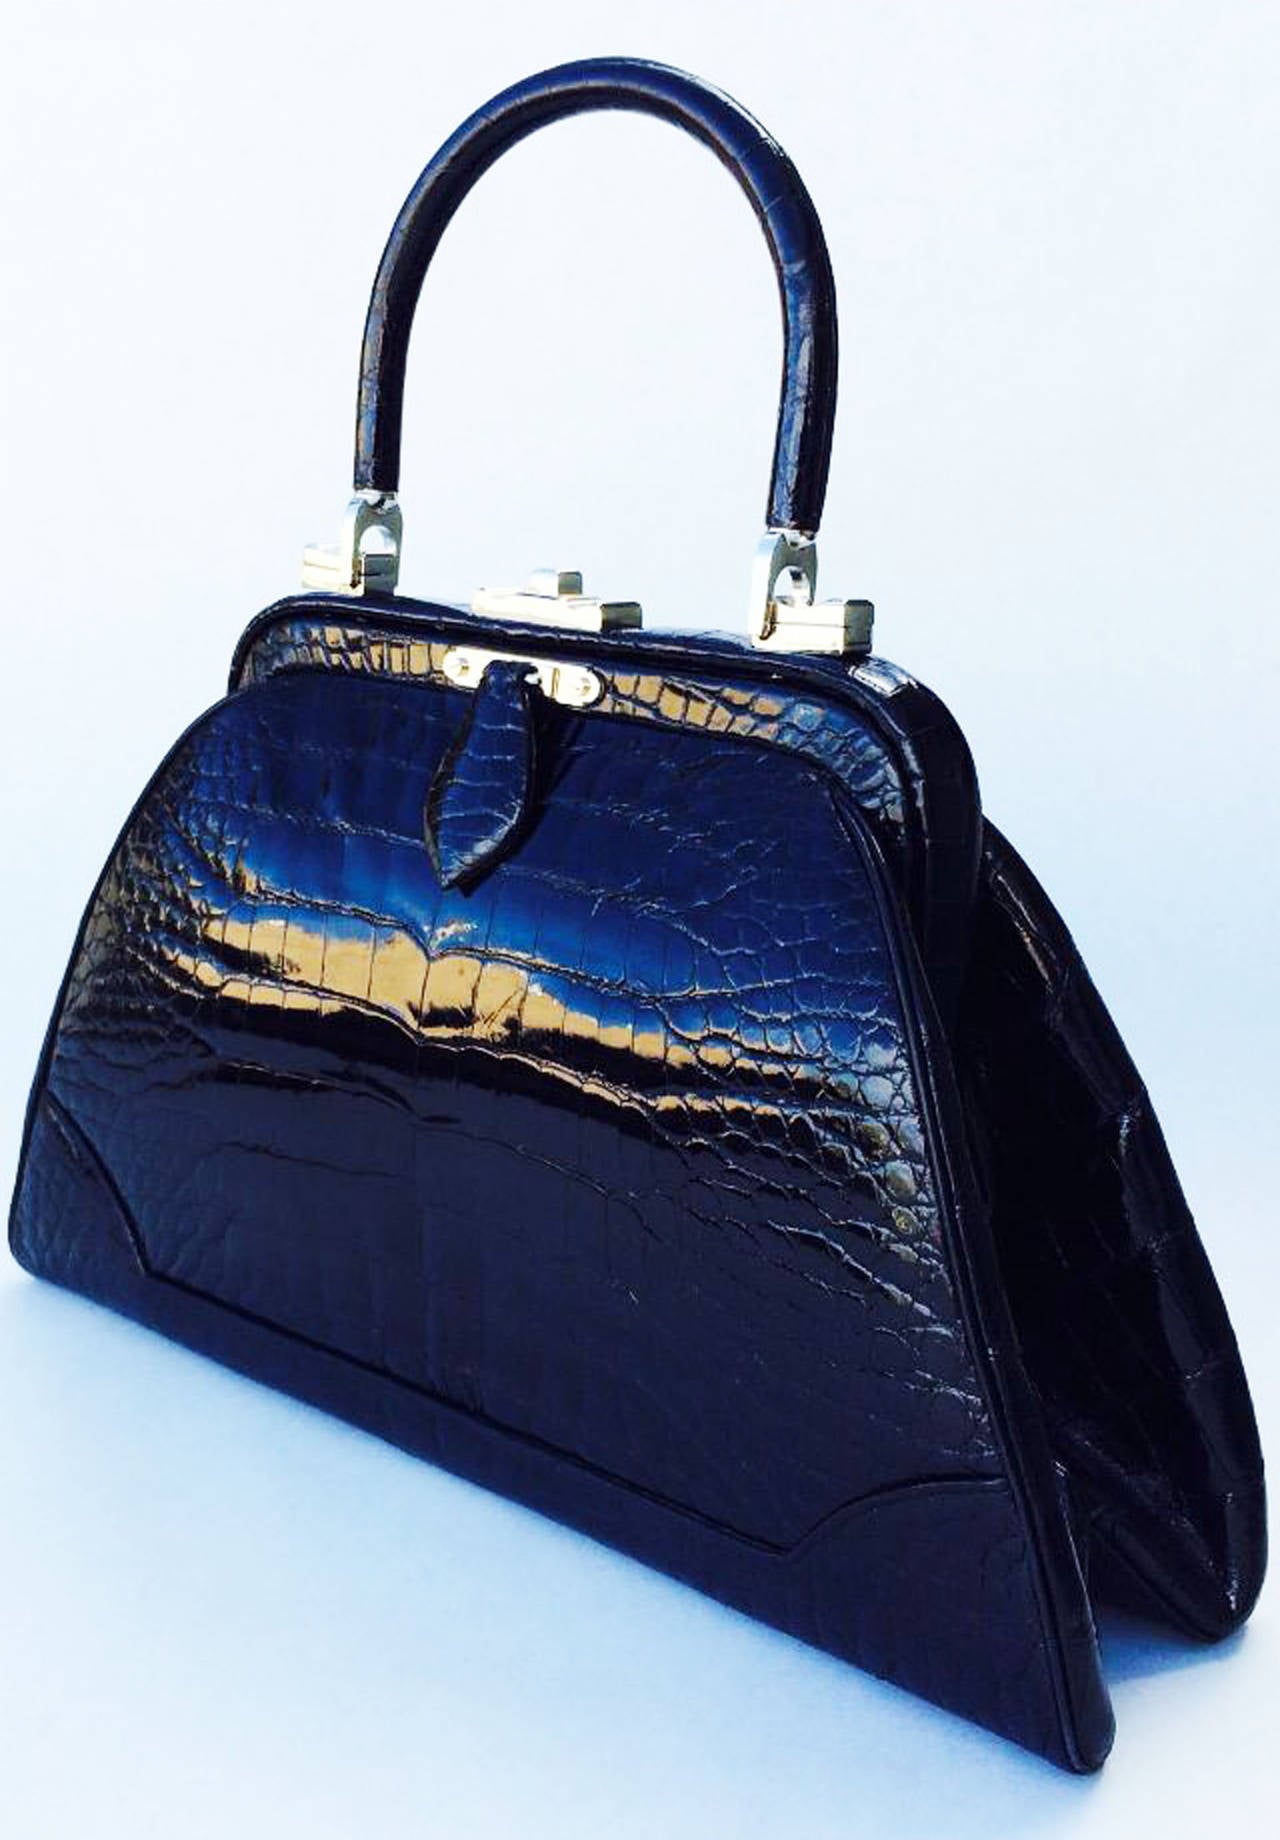 A exquisite and rare vintage Judith Leiber porosus crocodile handbag. Outstanding example features palladium plated hardware with a removable matching skins clutch handle. Item fully matching calf leather lined with original signature metal vanity